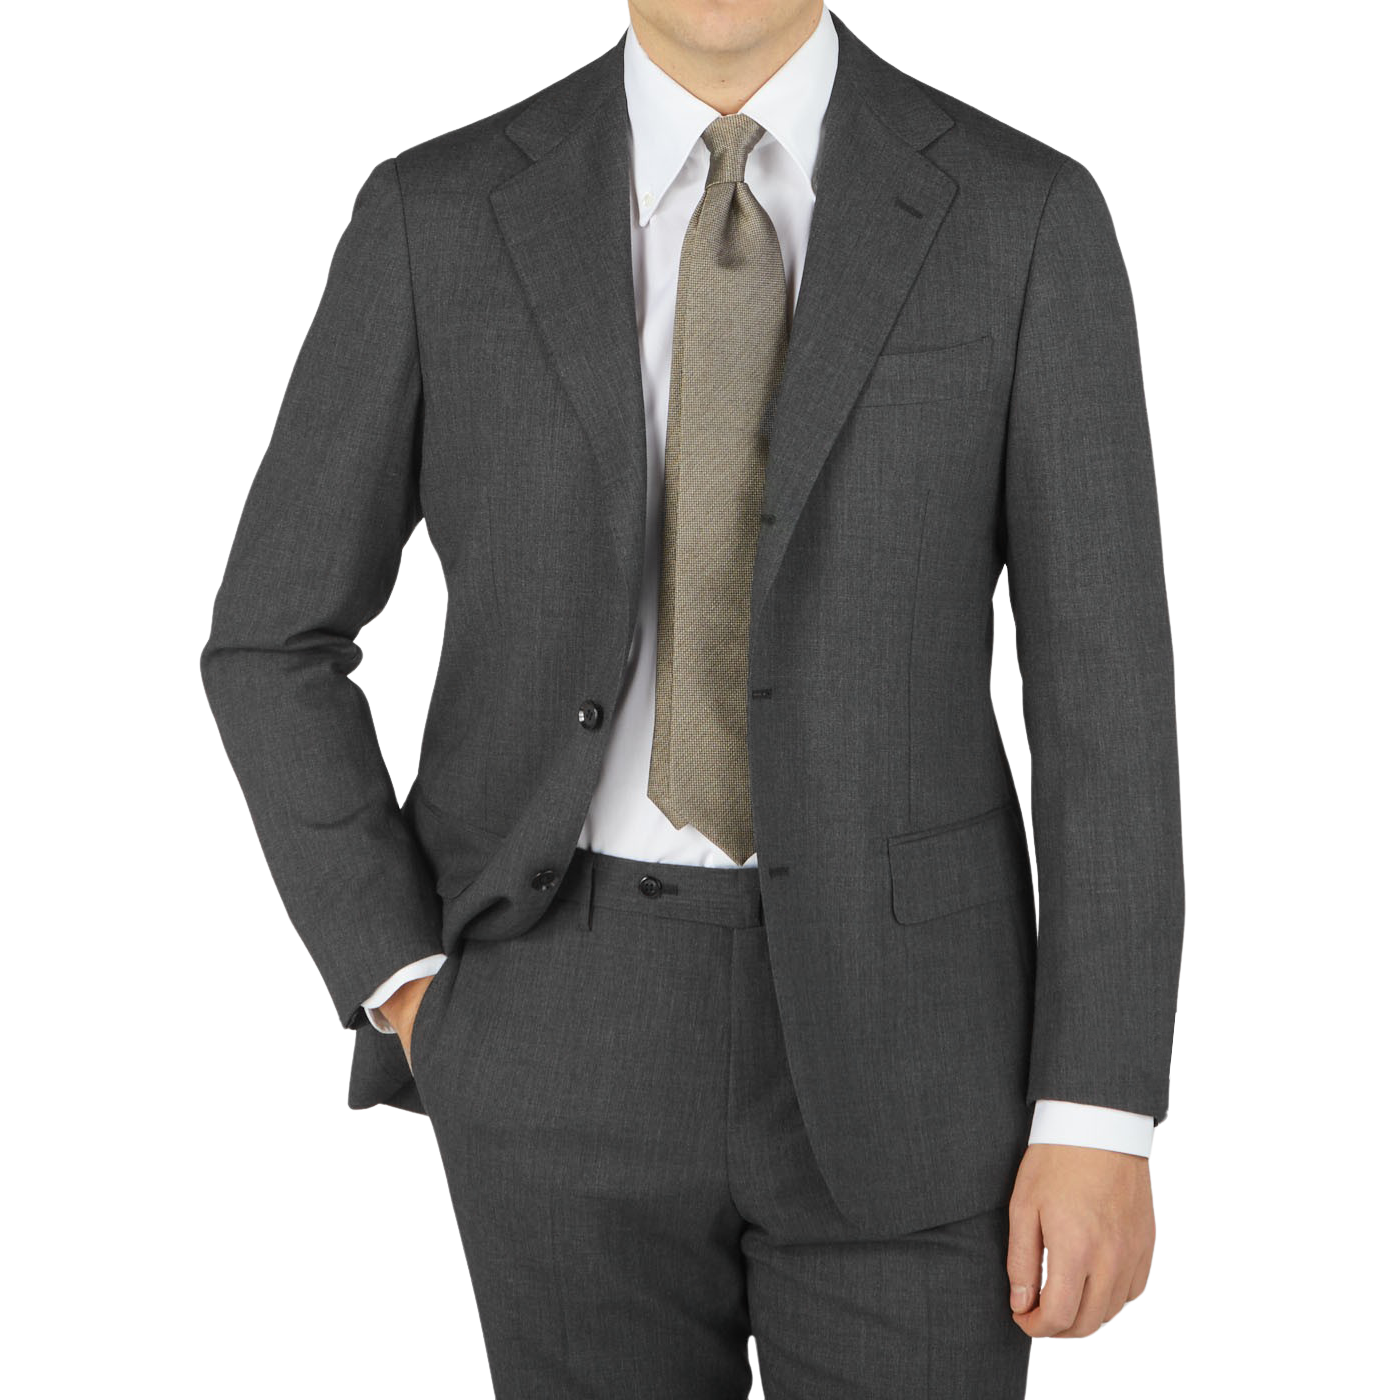 A contemporary version of a man wearing a Ring Jacket Grey High Twist Wool Suit, complete with a tie.